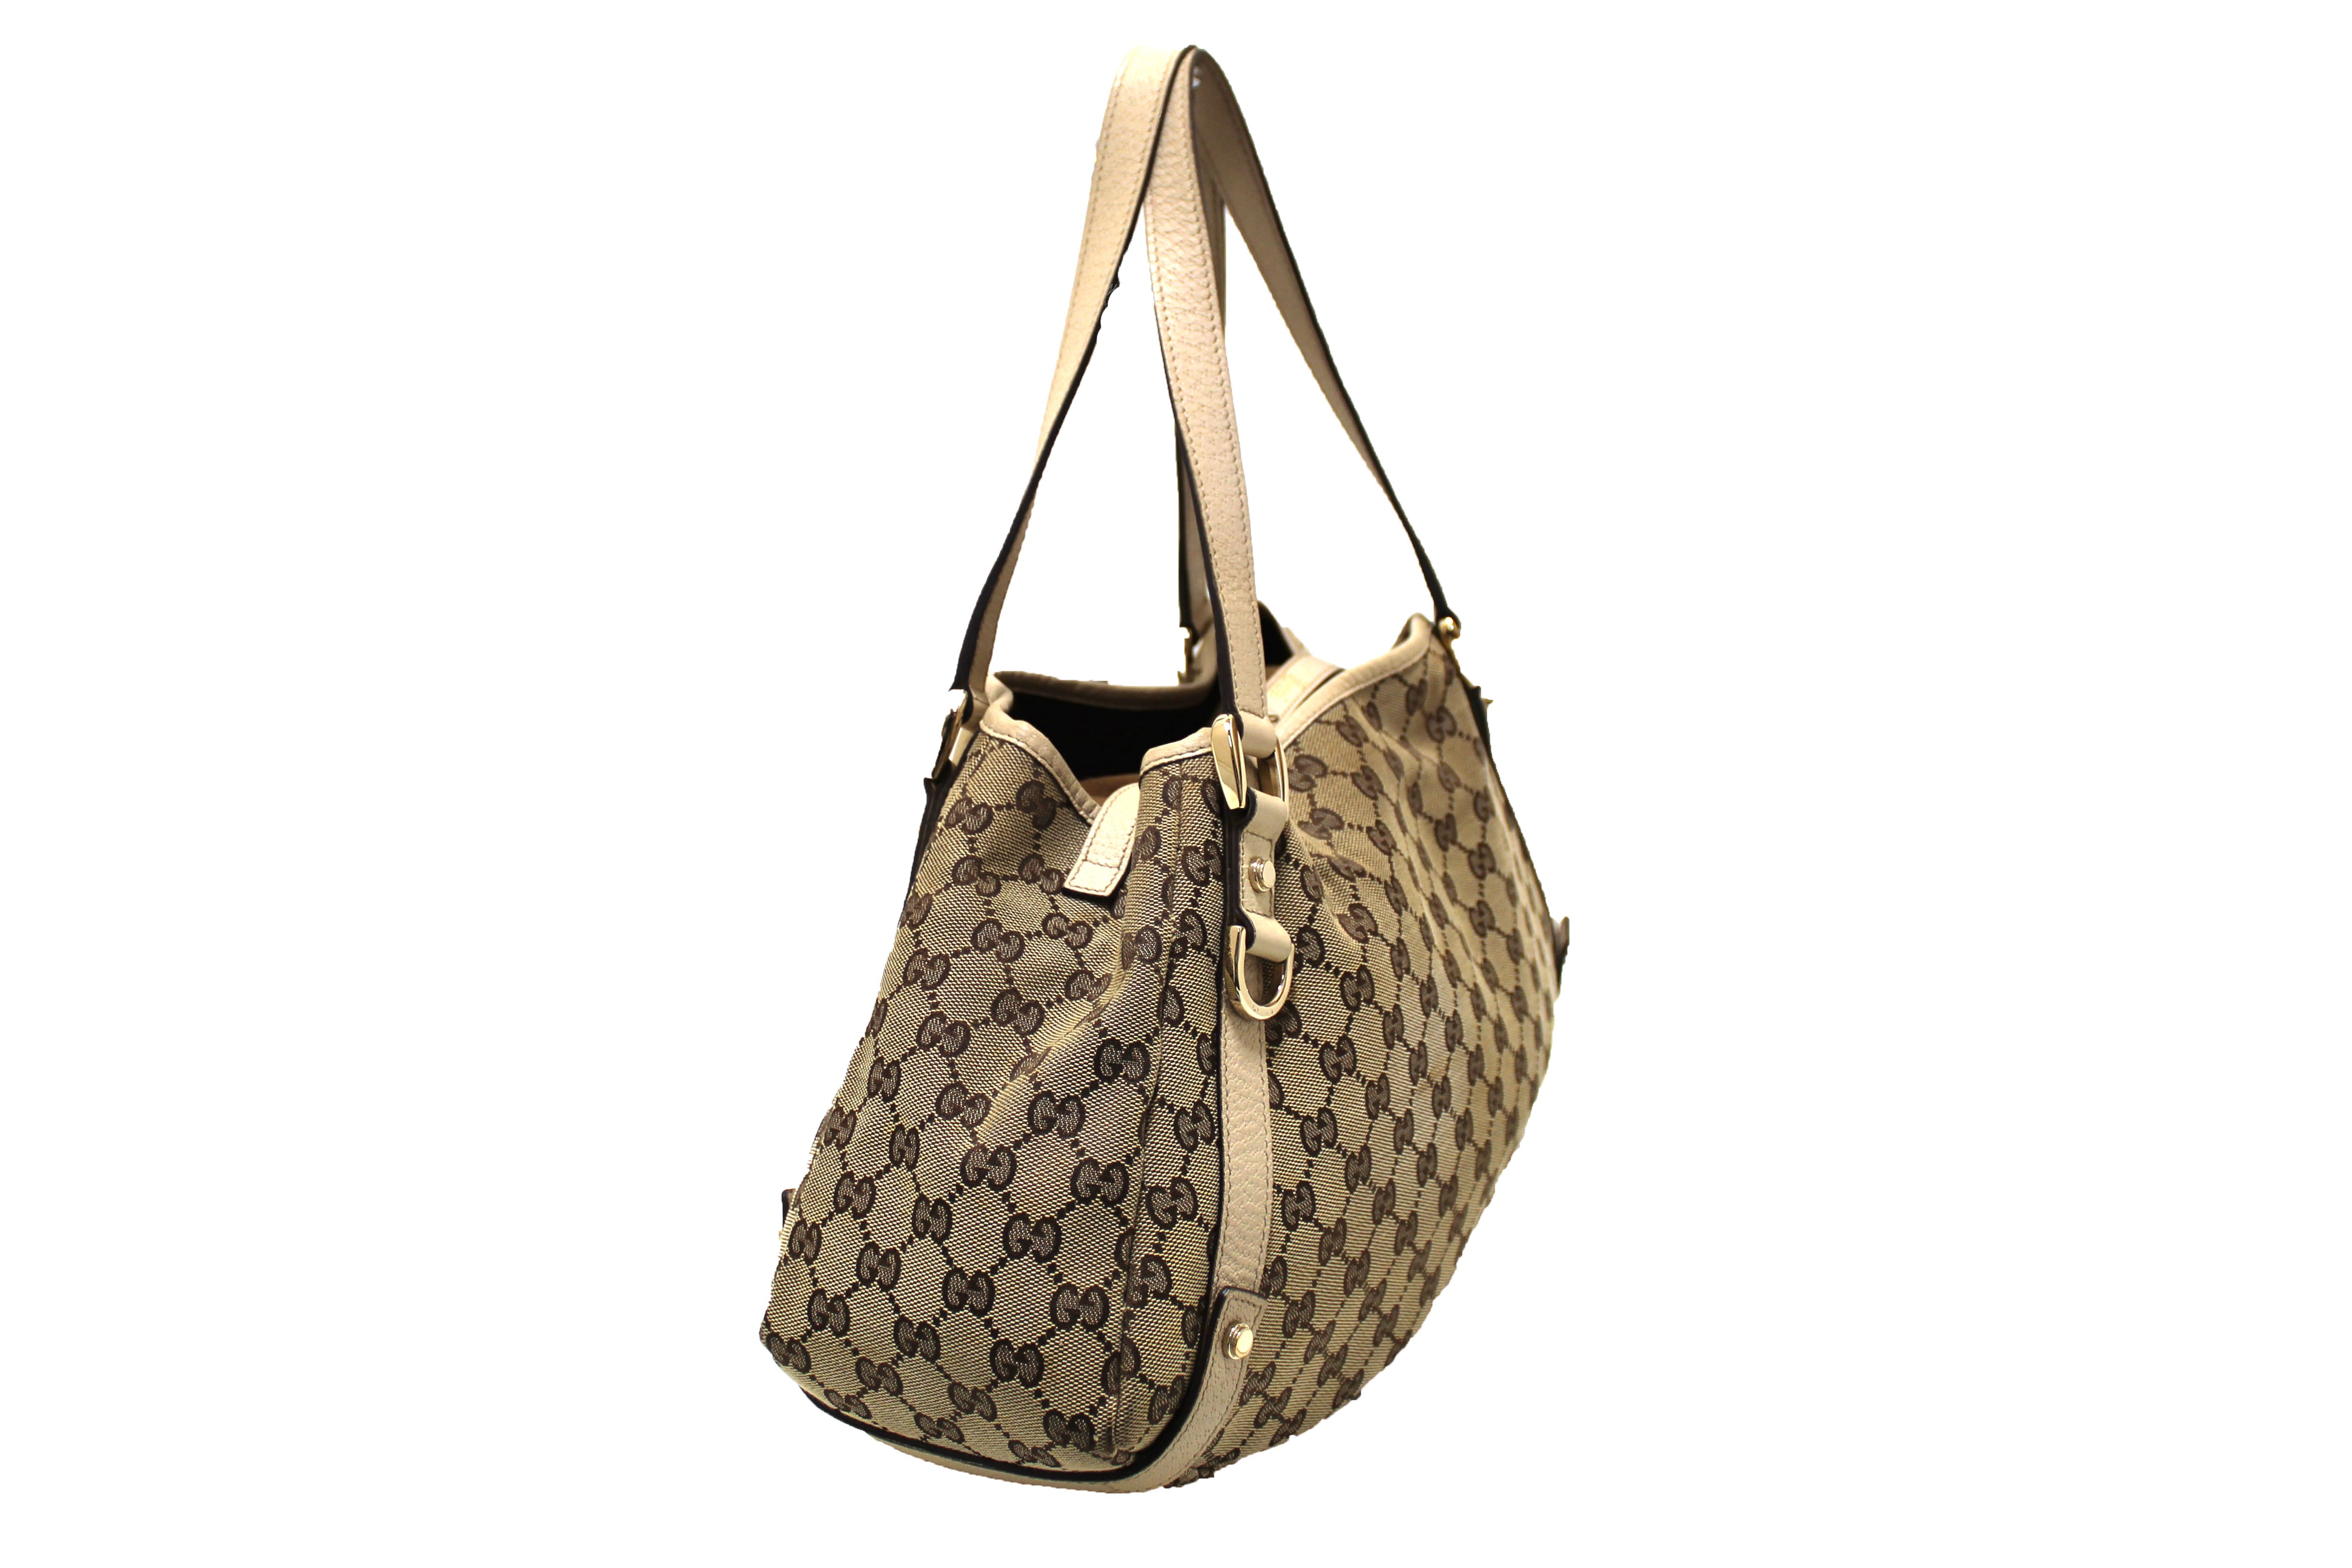 Authentic Gucci Beige GG Fabric Abbey Tote Shoulder Bag 130736